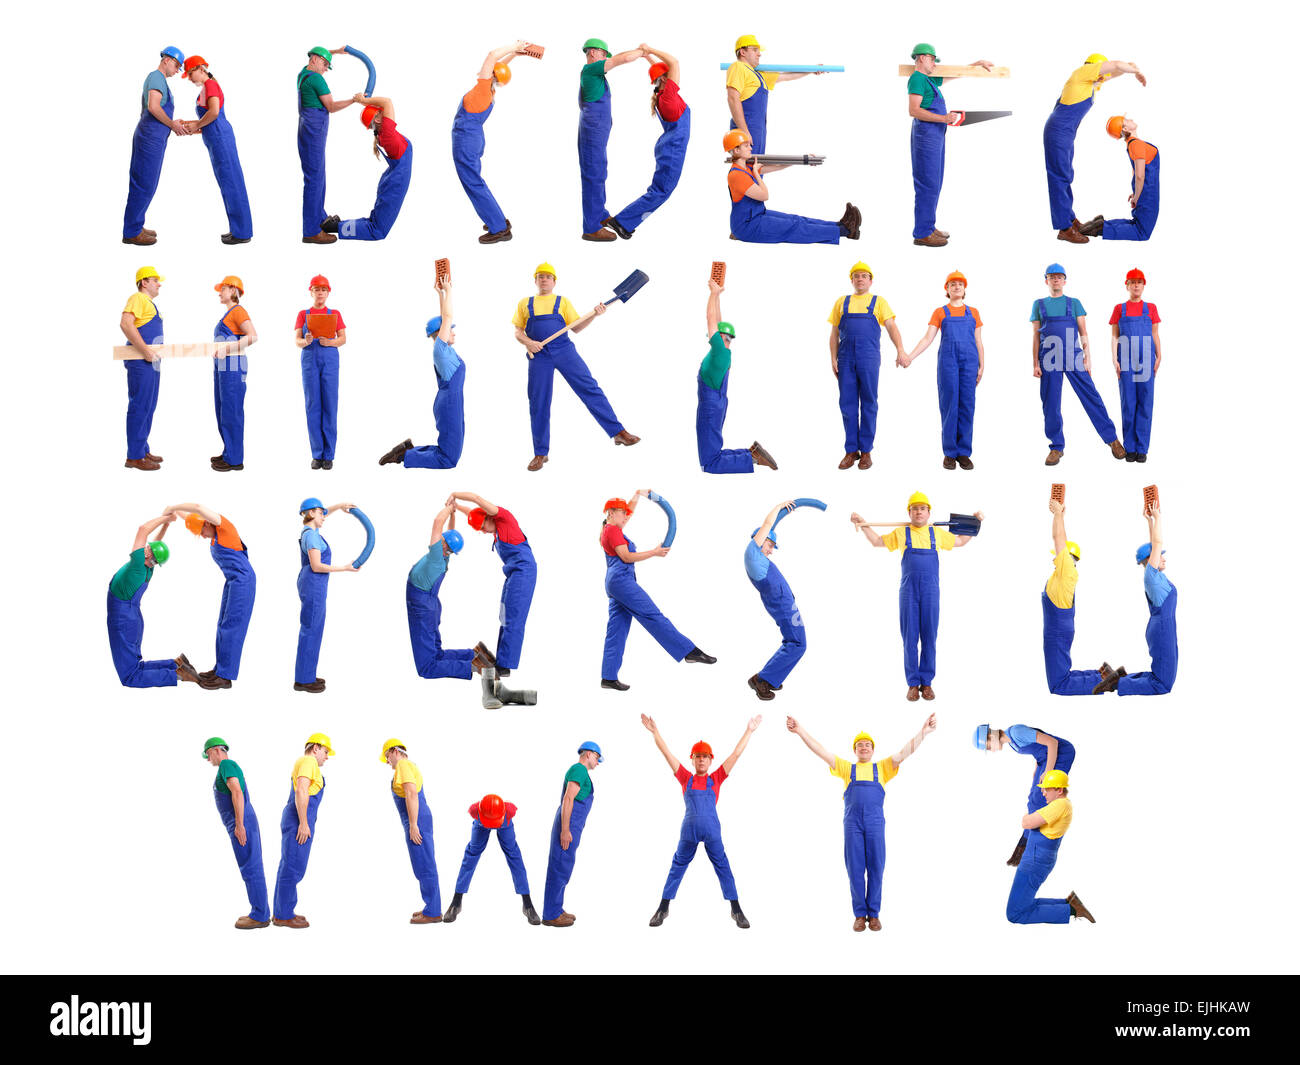 Alphabet formed from young people wearing industrial uniforms and helmets posing with various tools and accessories Stock Photo